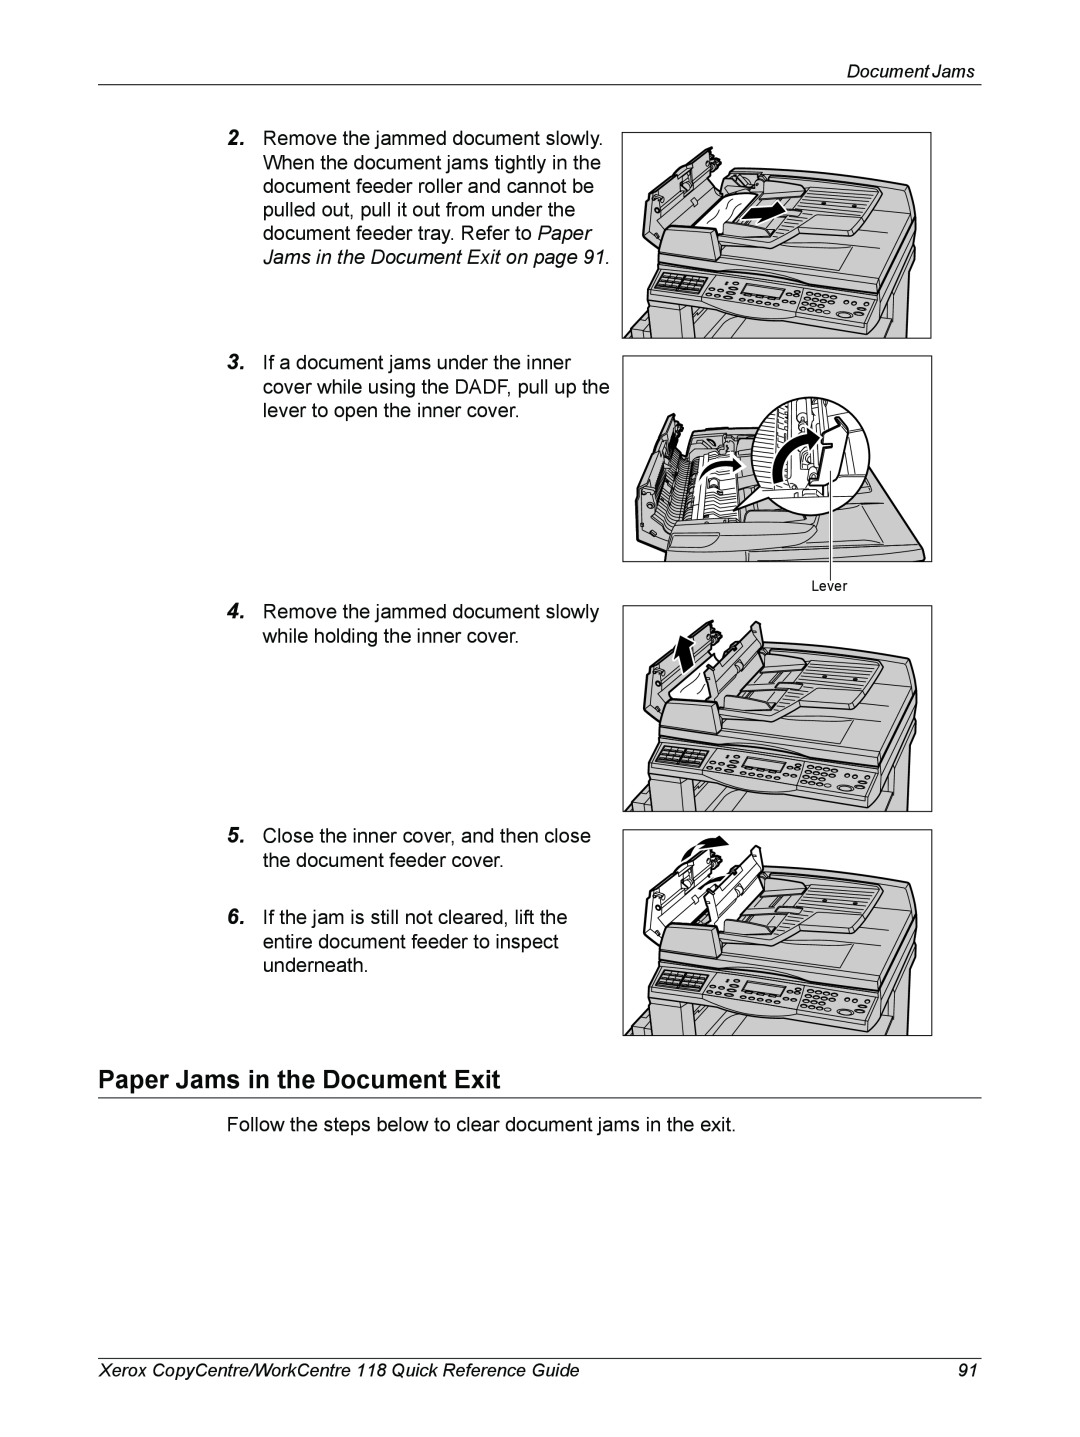 Xerox M118i, C118 manual Paper Jams in the Document Exit 